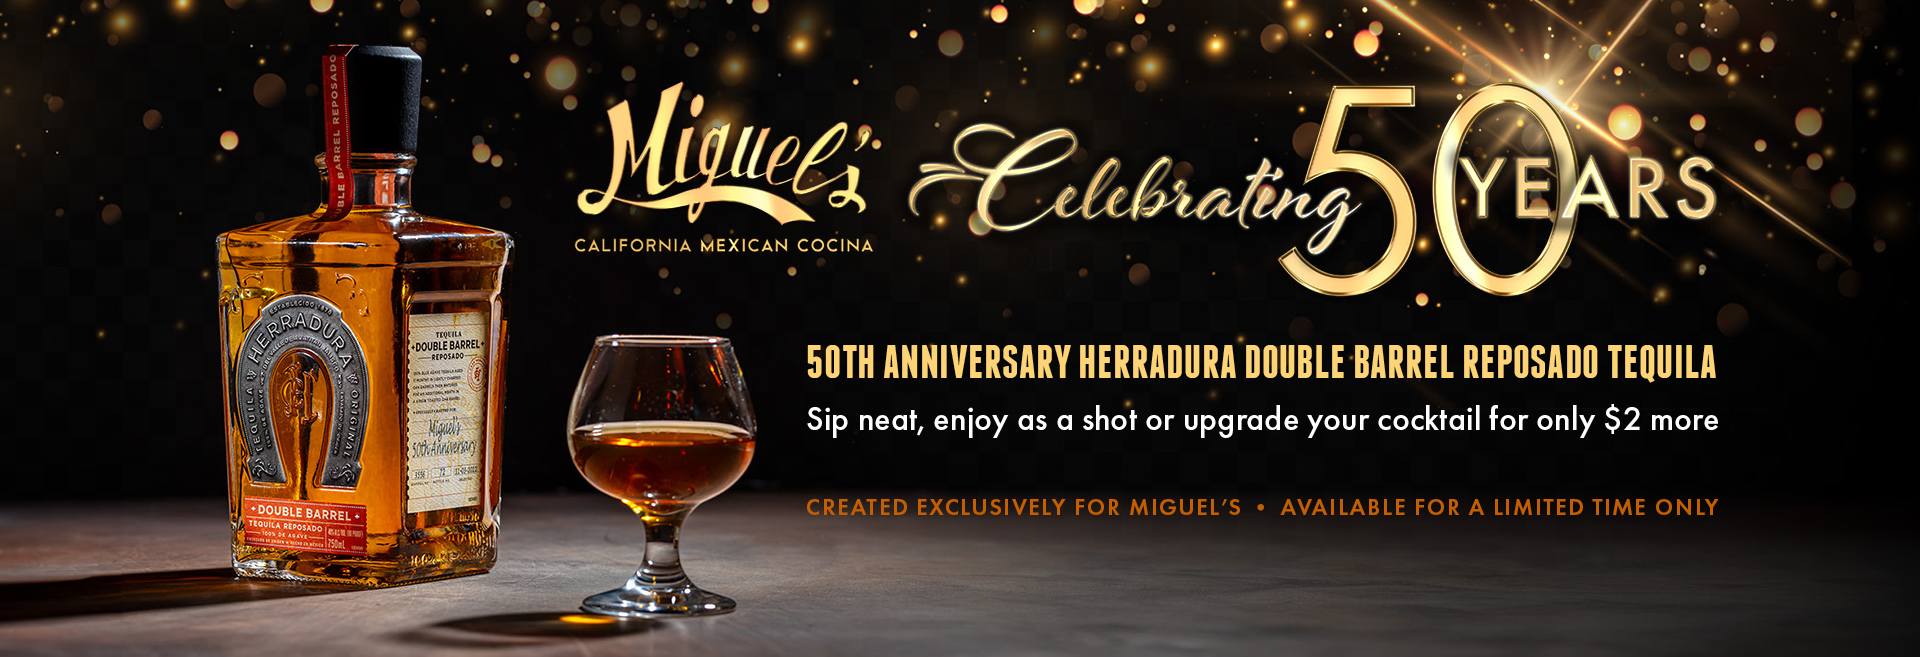 Celebrating 50 years. 50th anniversary herradura double barrel reposado tequila. Sip neat, enjoy as a shot or upgrade your cocktail for only $2 more. Created exclusively for miguel's, available for a limited time only.